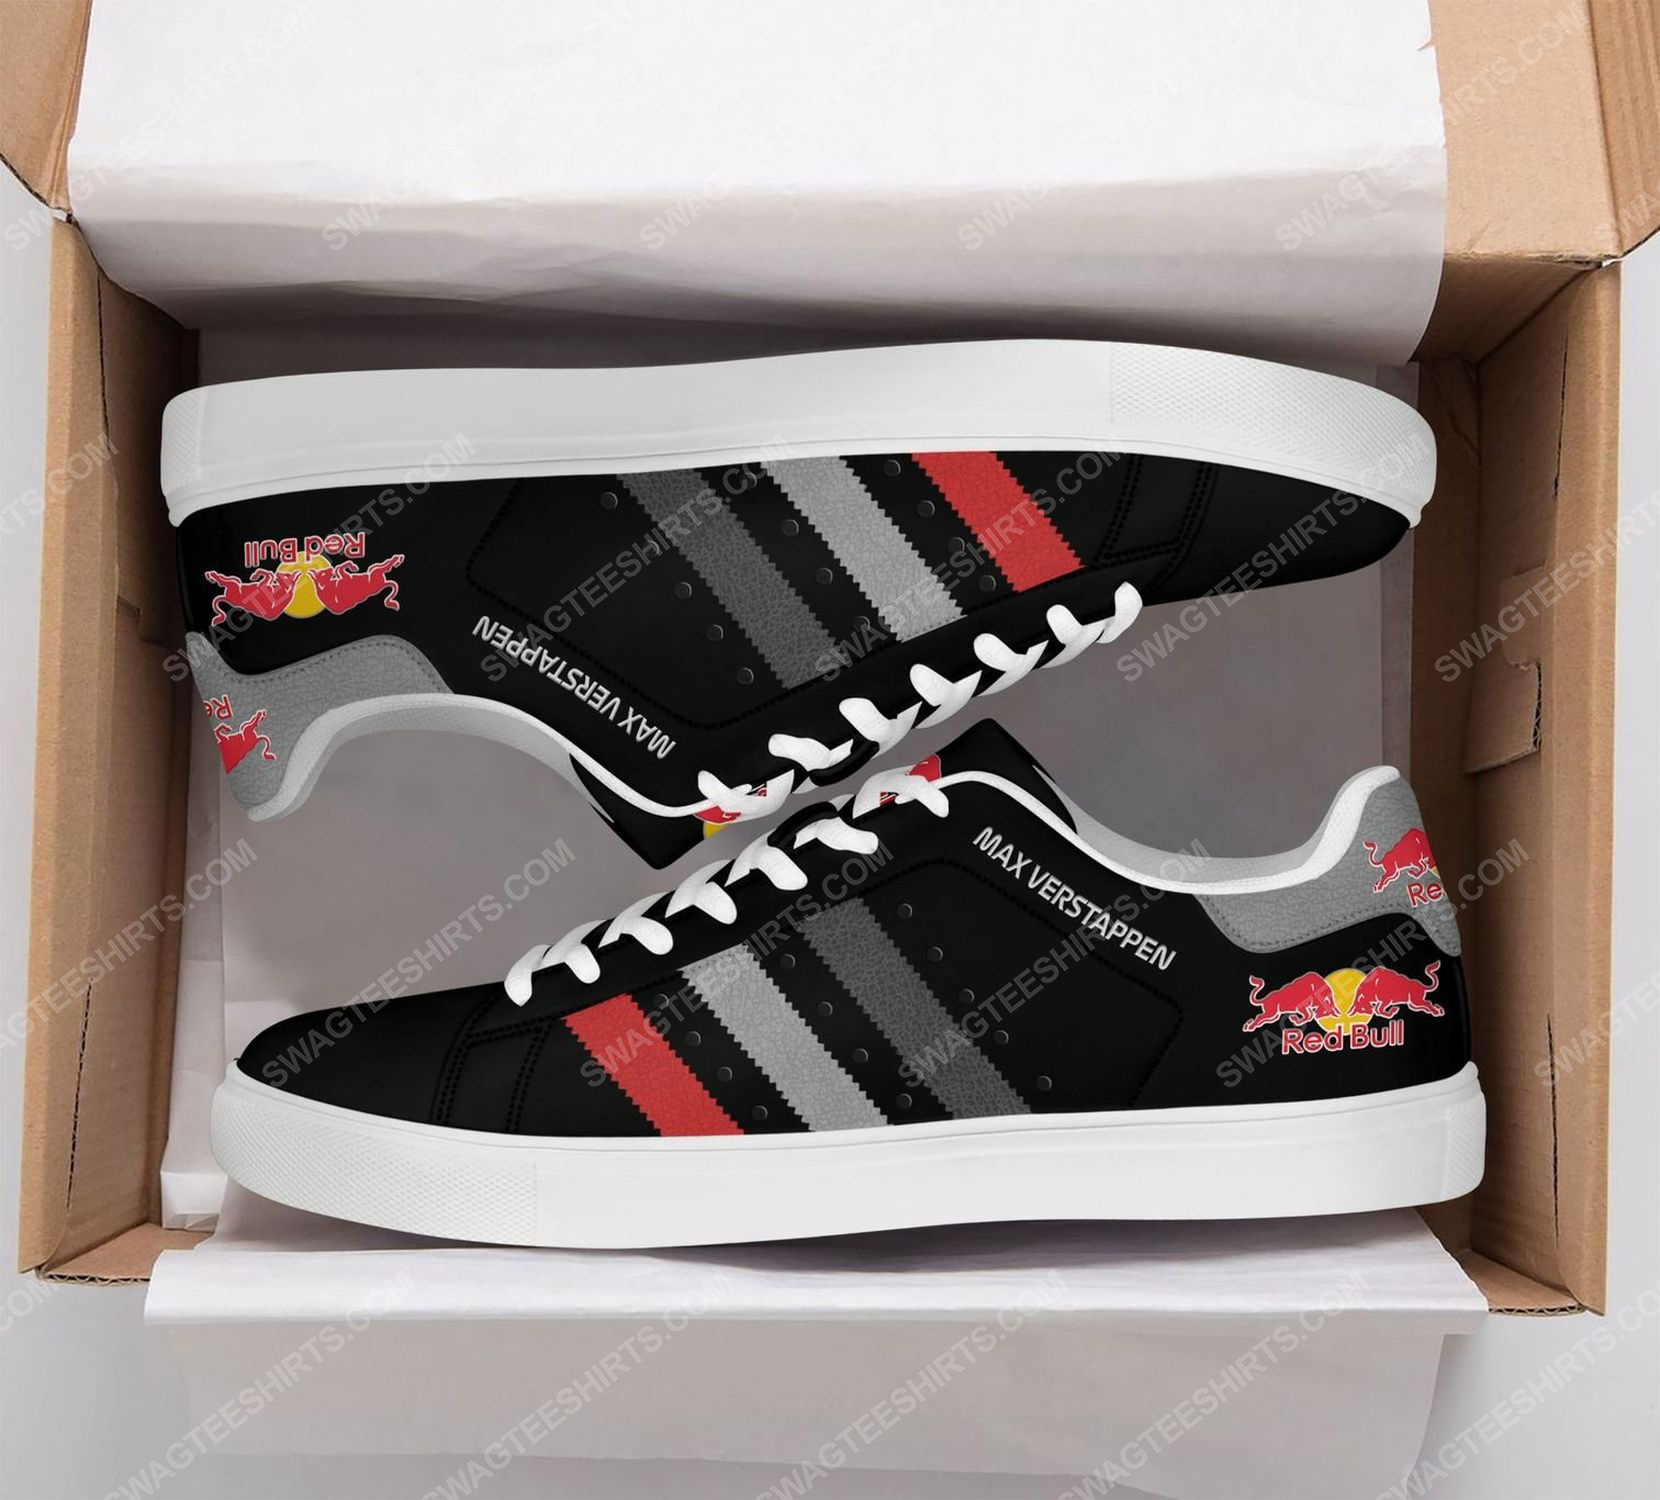 [special edition] Max verstappen red bull stan smith shoes – Maria